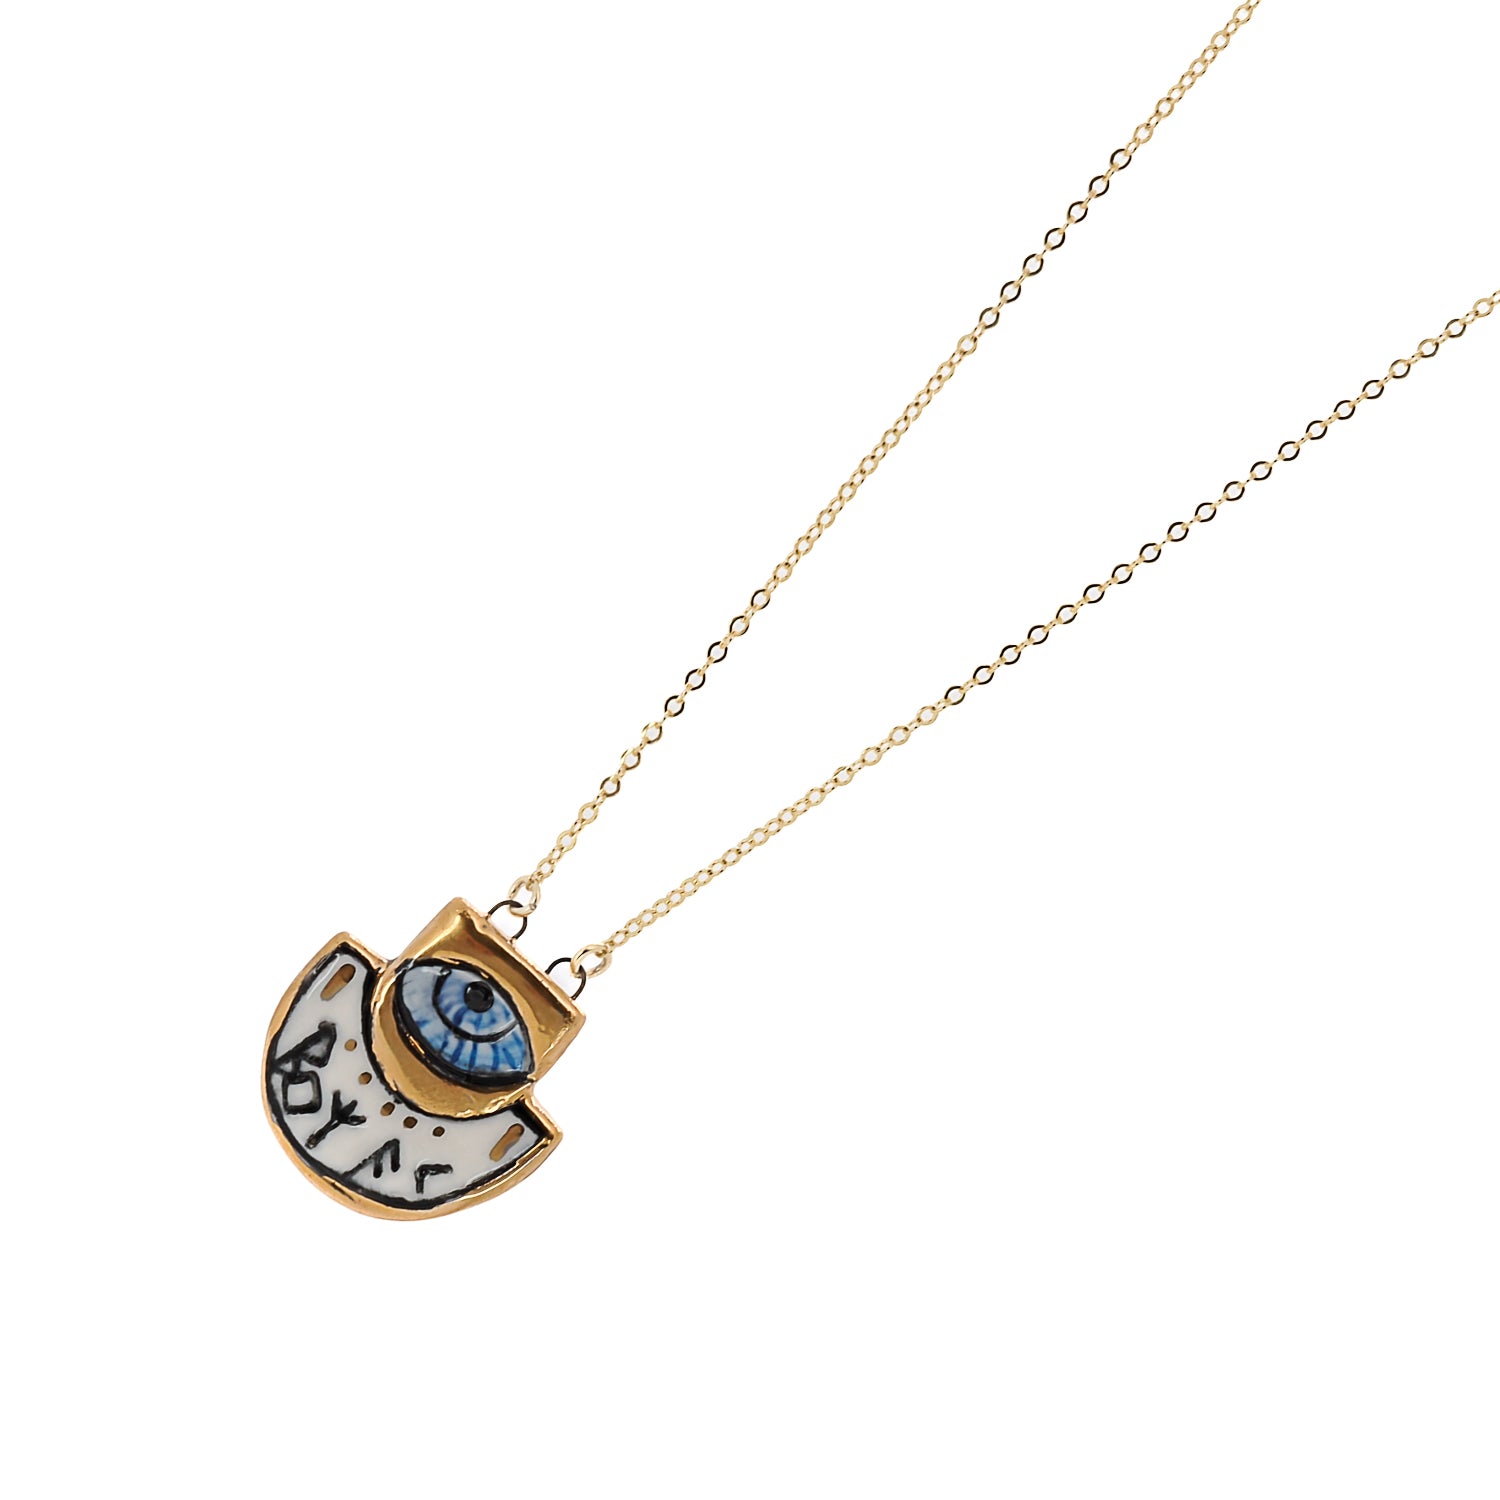 Timeless and Unique Jewelry - Celebrate the past, present, and future with this exceptional necklace.